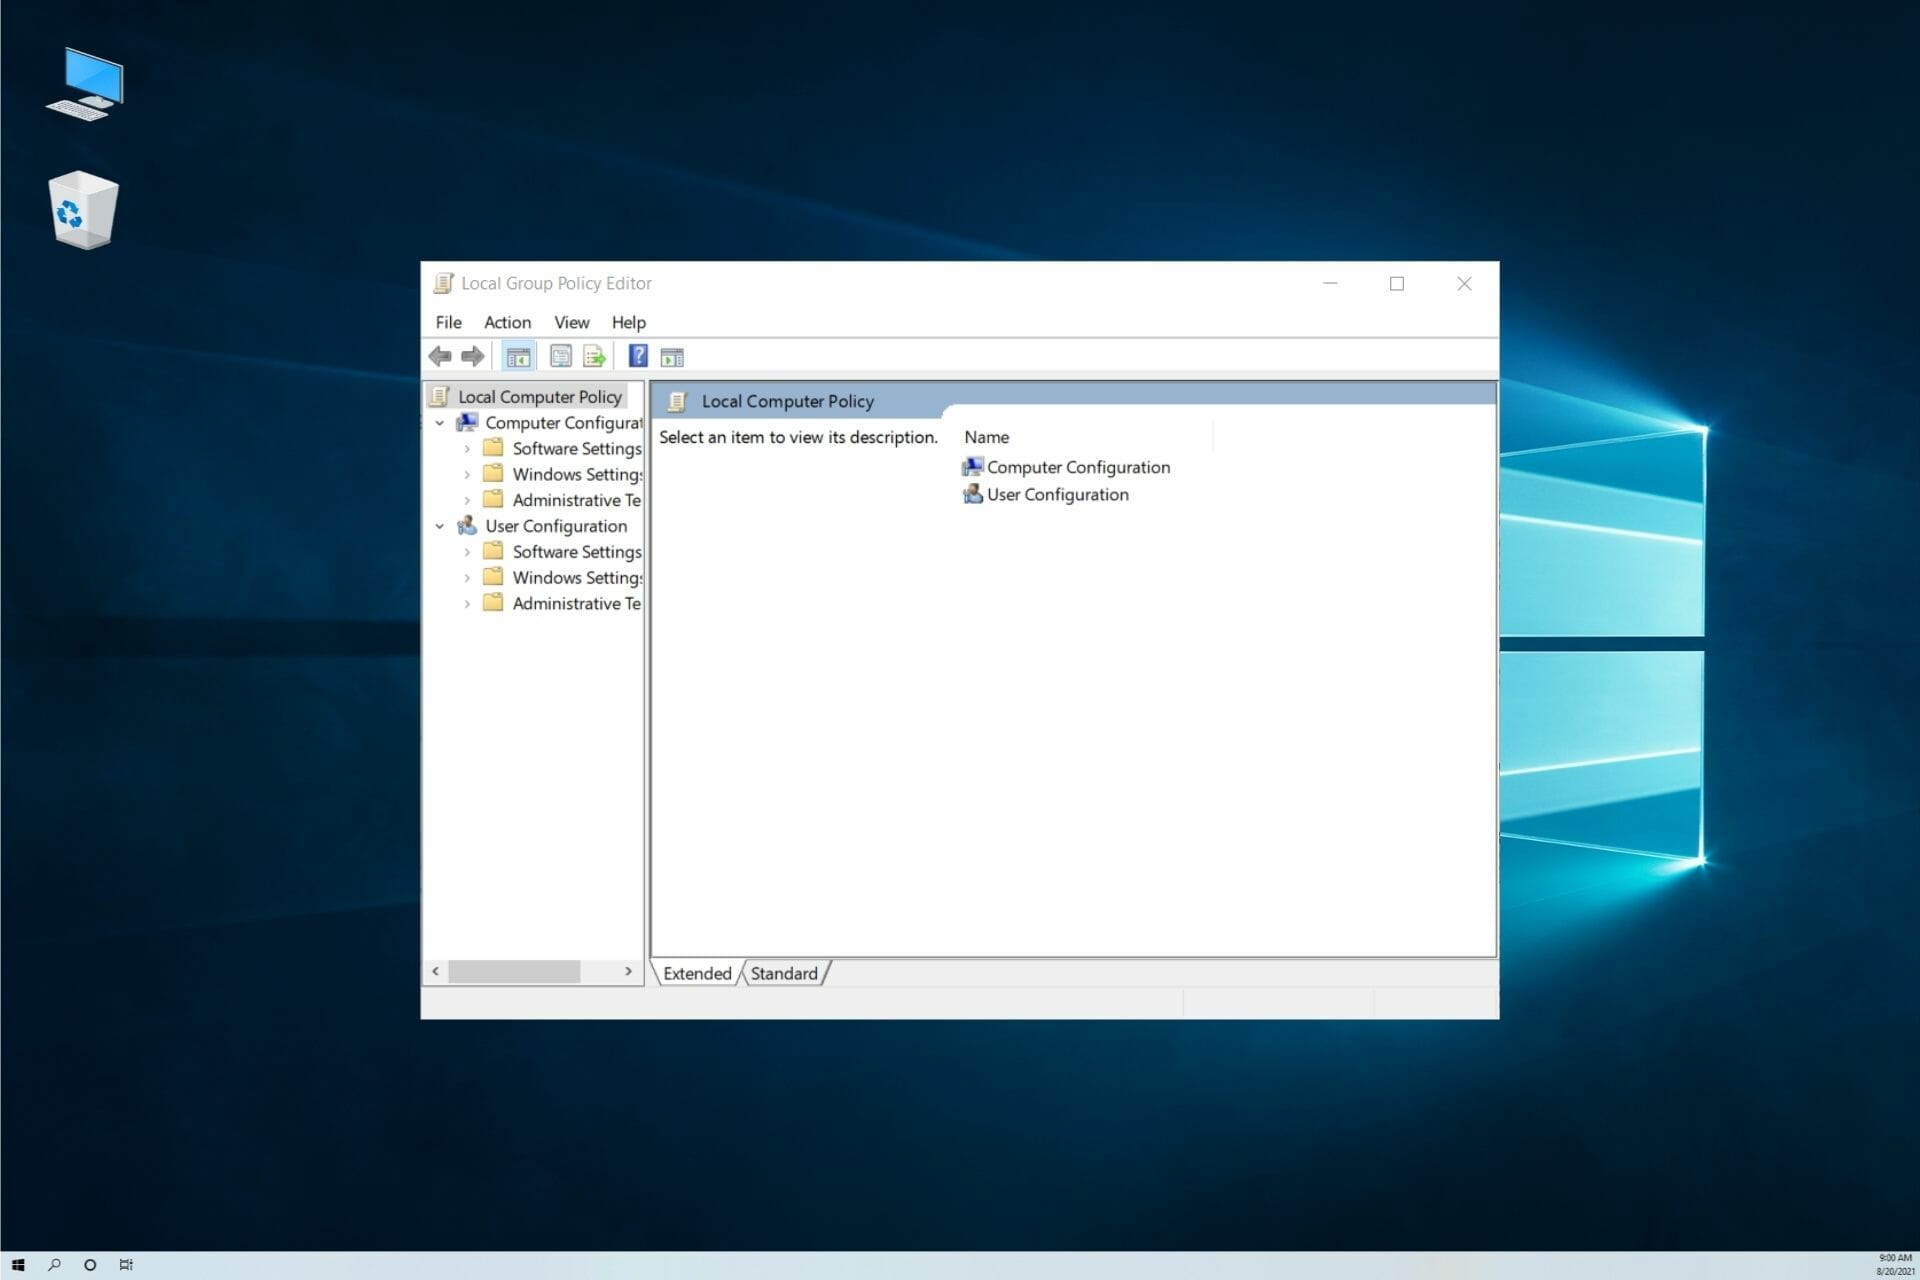 How to install Group Policy Management in Windows 10